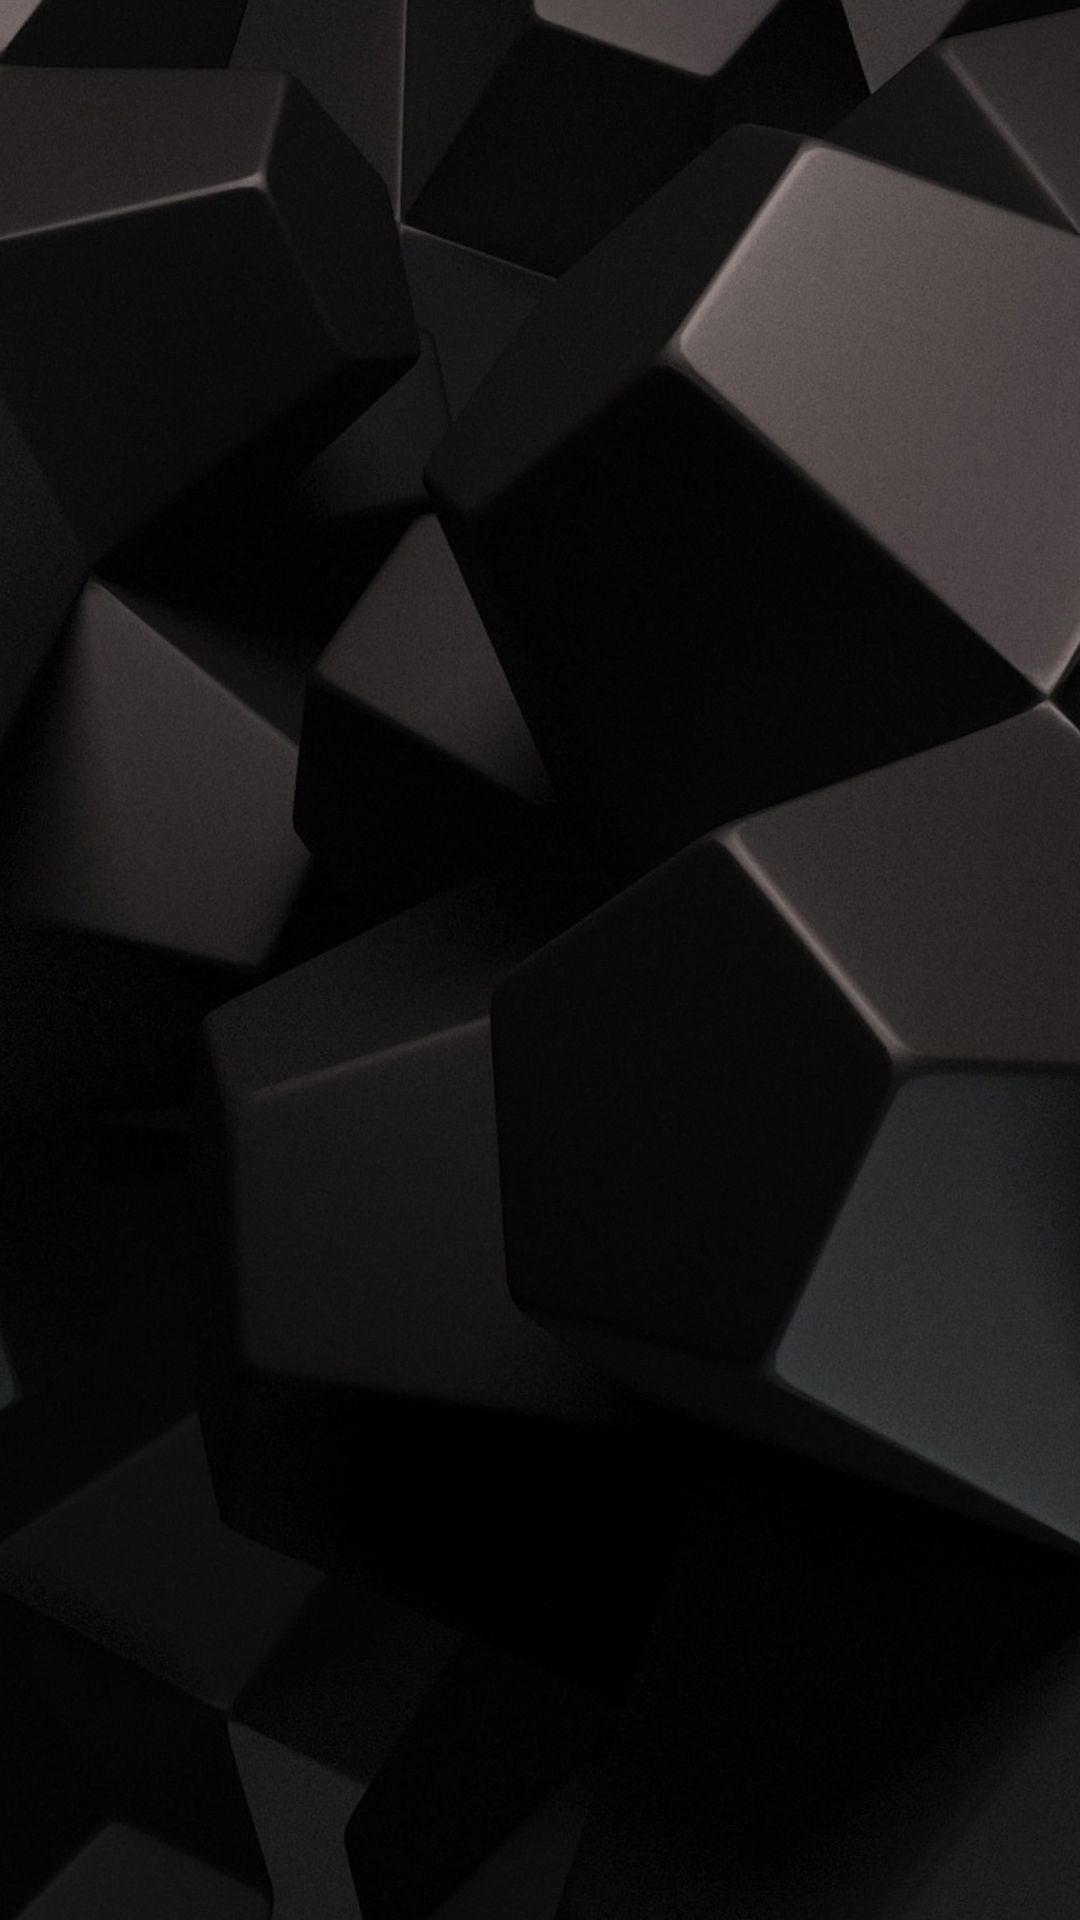 3D Abstract Dark Phone Wallpaper Free 3D Abstract Dark Phone Background